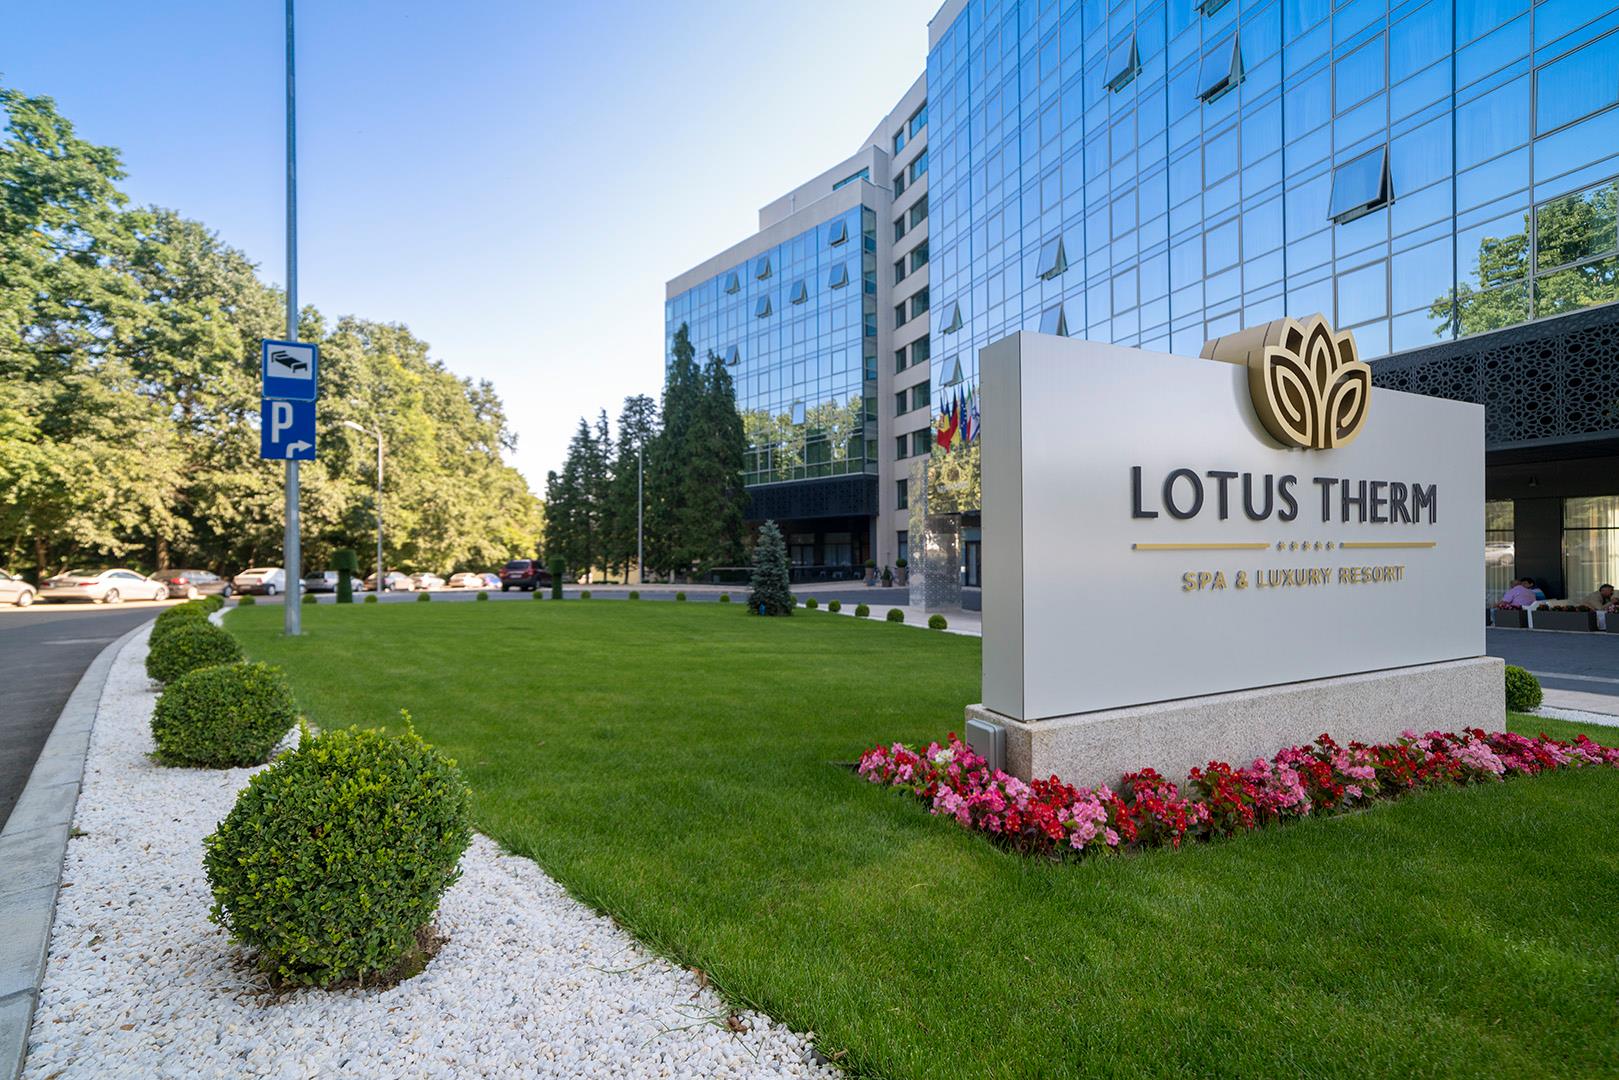 HOTEL LOTUS THERM